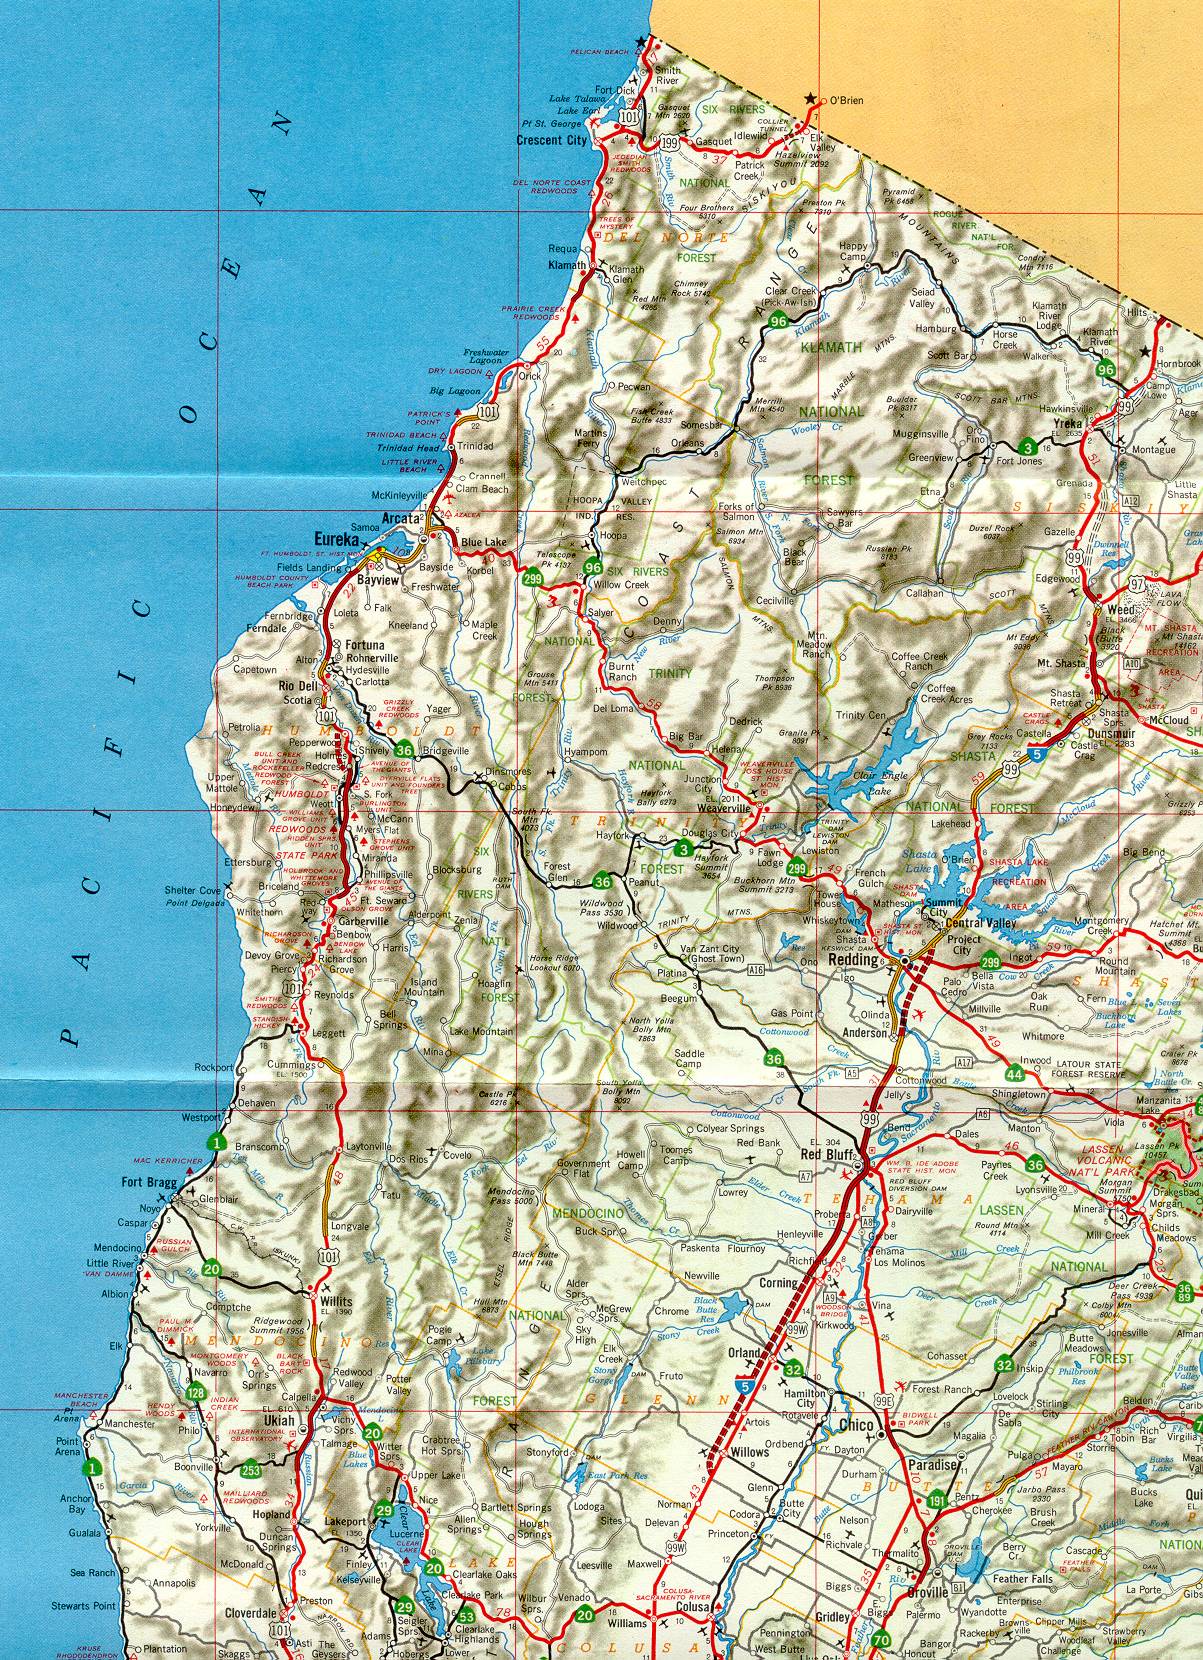 Section of 1966 official highway map for California